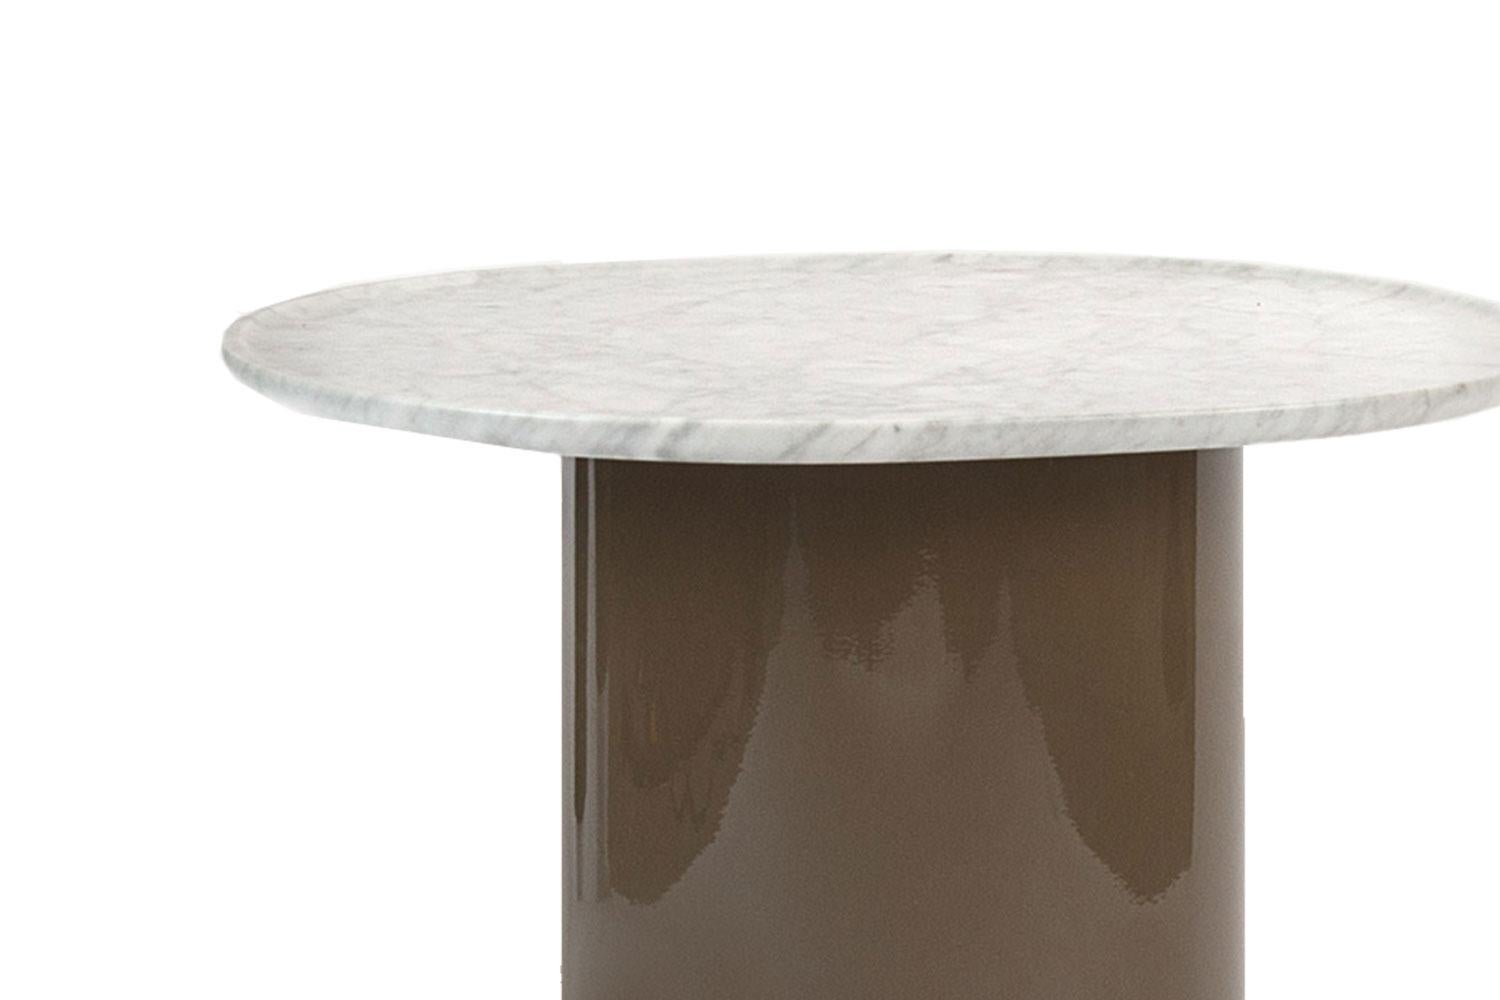 This button oval small table has a mushroom colored glossy frame with Carrara white marble top is designed by Edward Barber and Jay Osgerby for B&B Italia. The lacquered cylindrical base is slightly rounded at the bottom to soften their geometry and